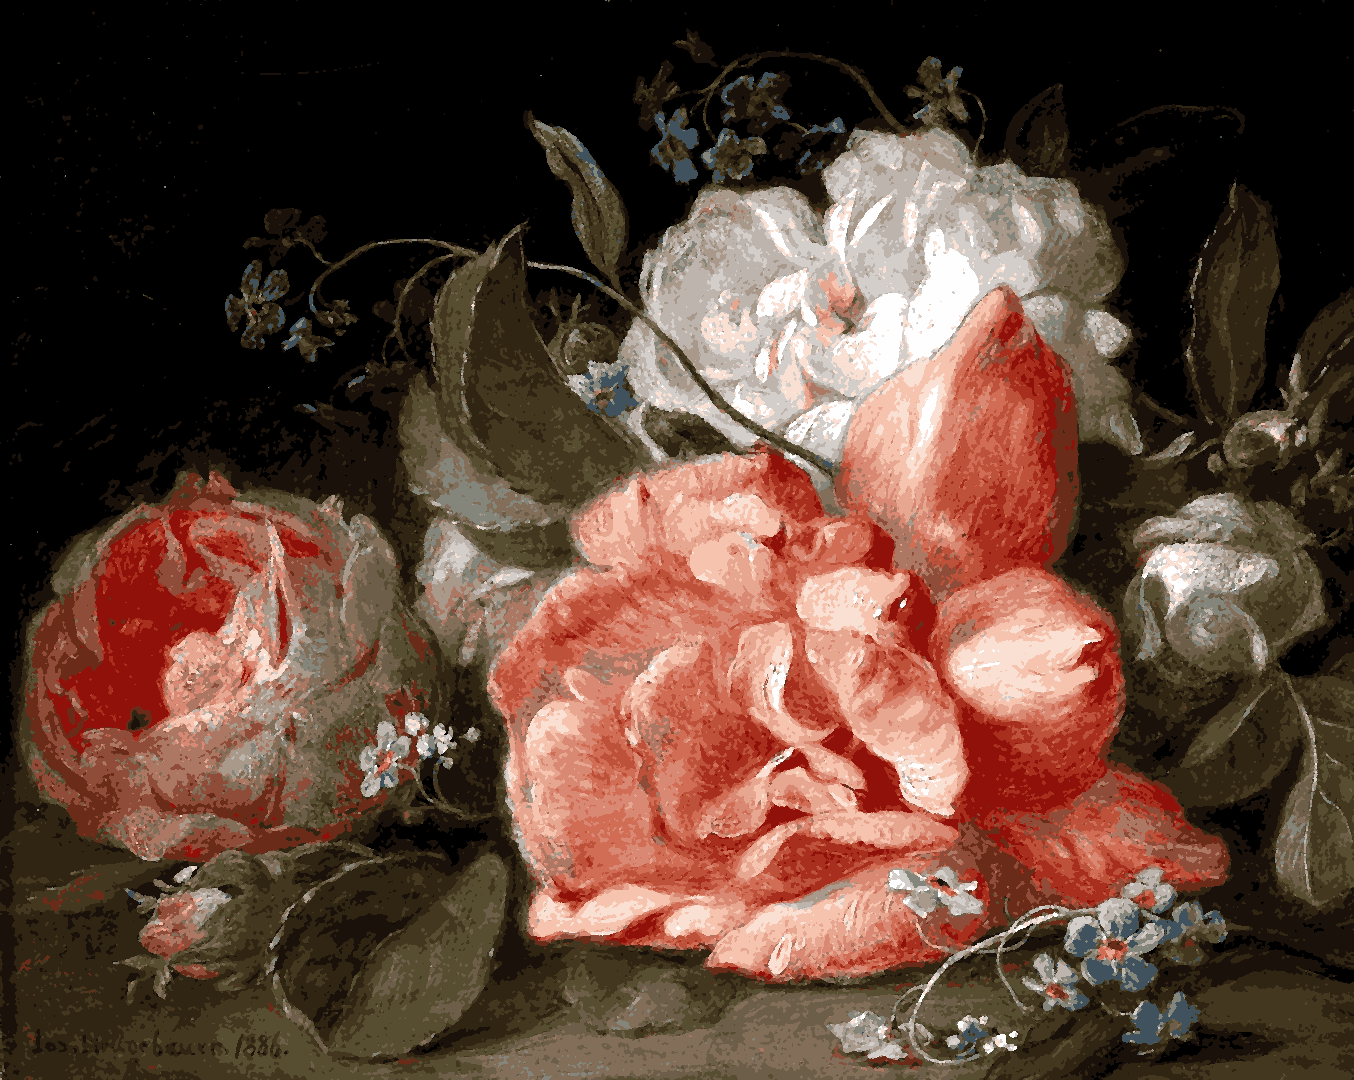 A Bouquet of Flowers with Roses by Josef Neugebaue - Van-Go Paint-By-Number Kit